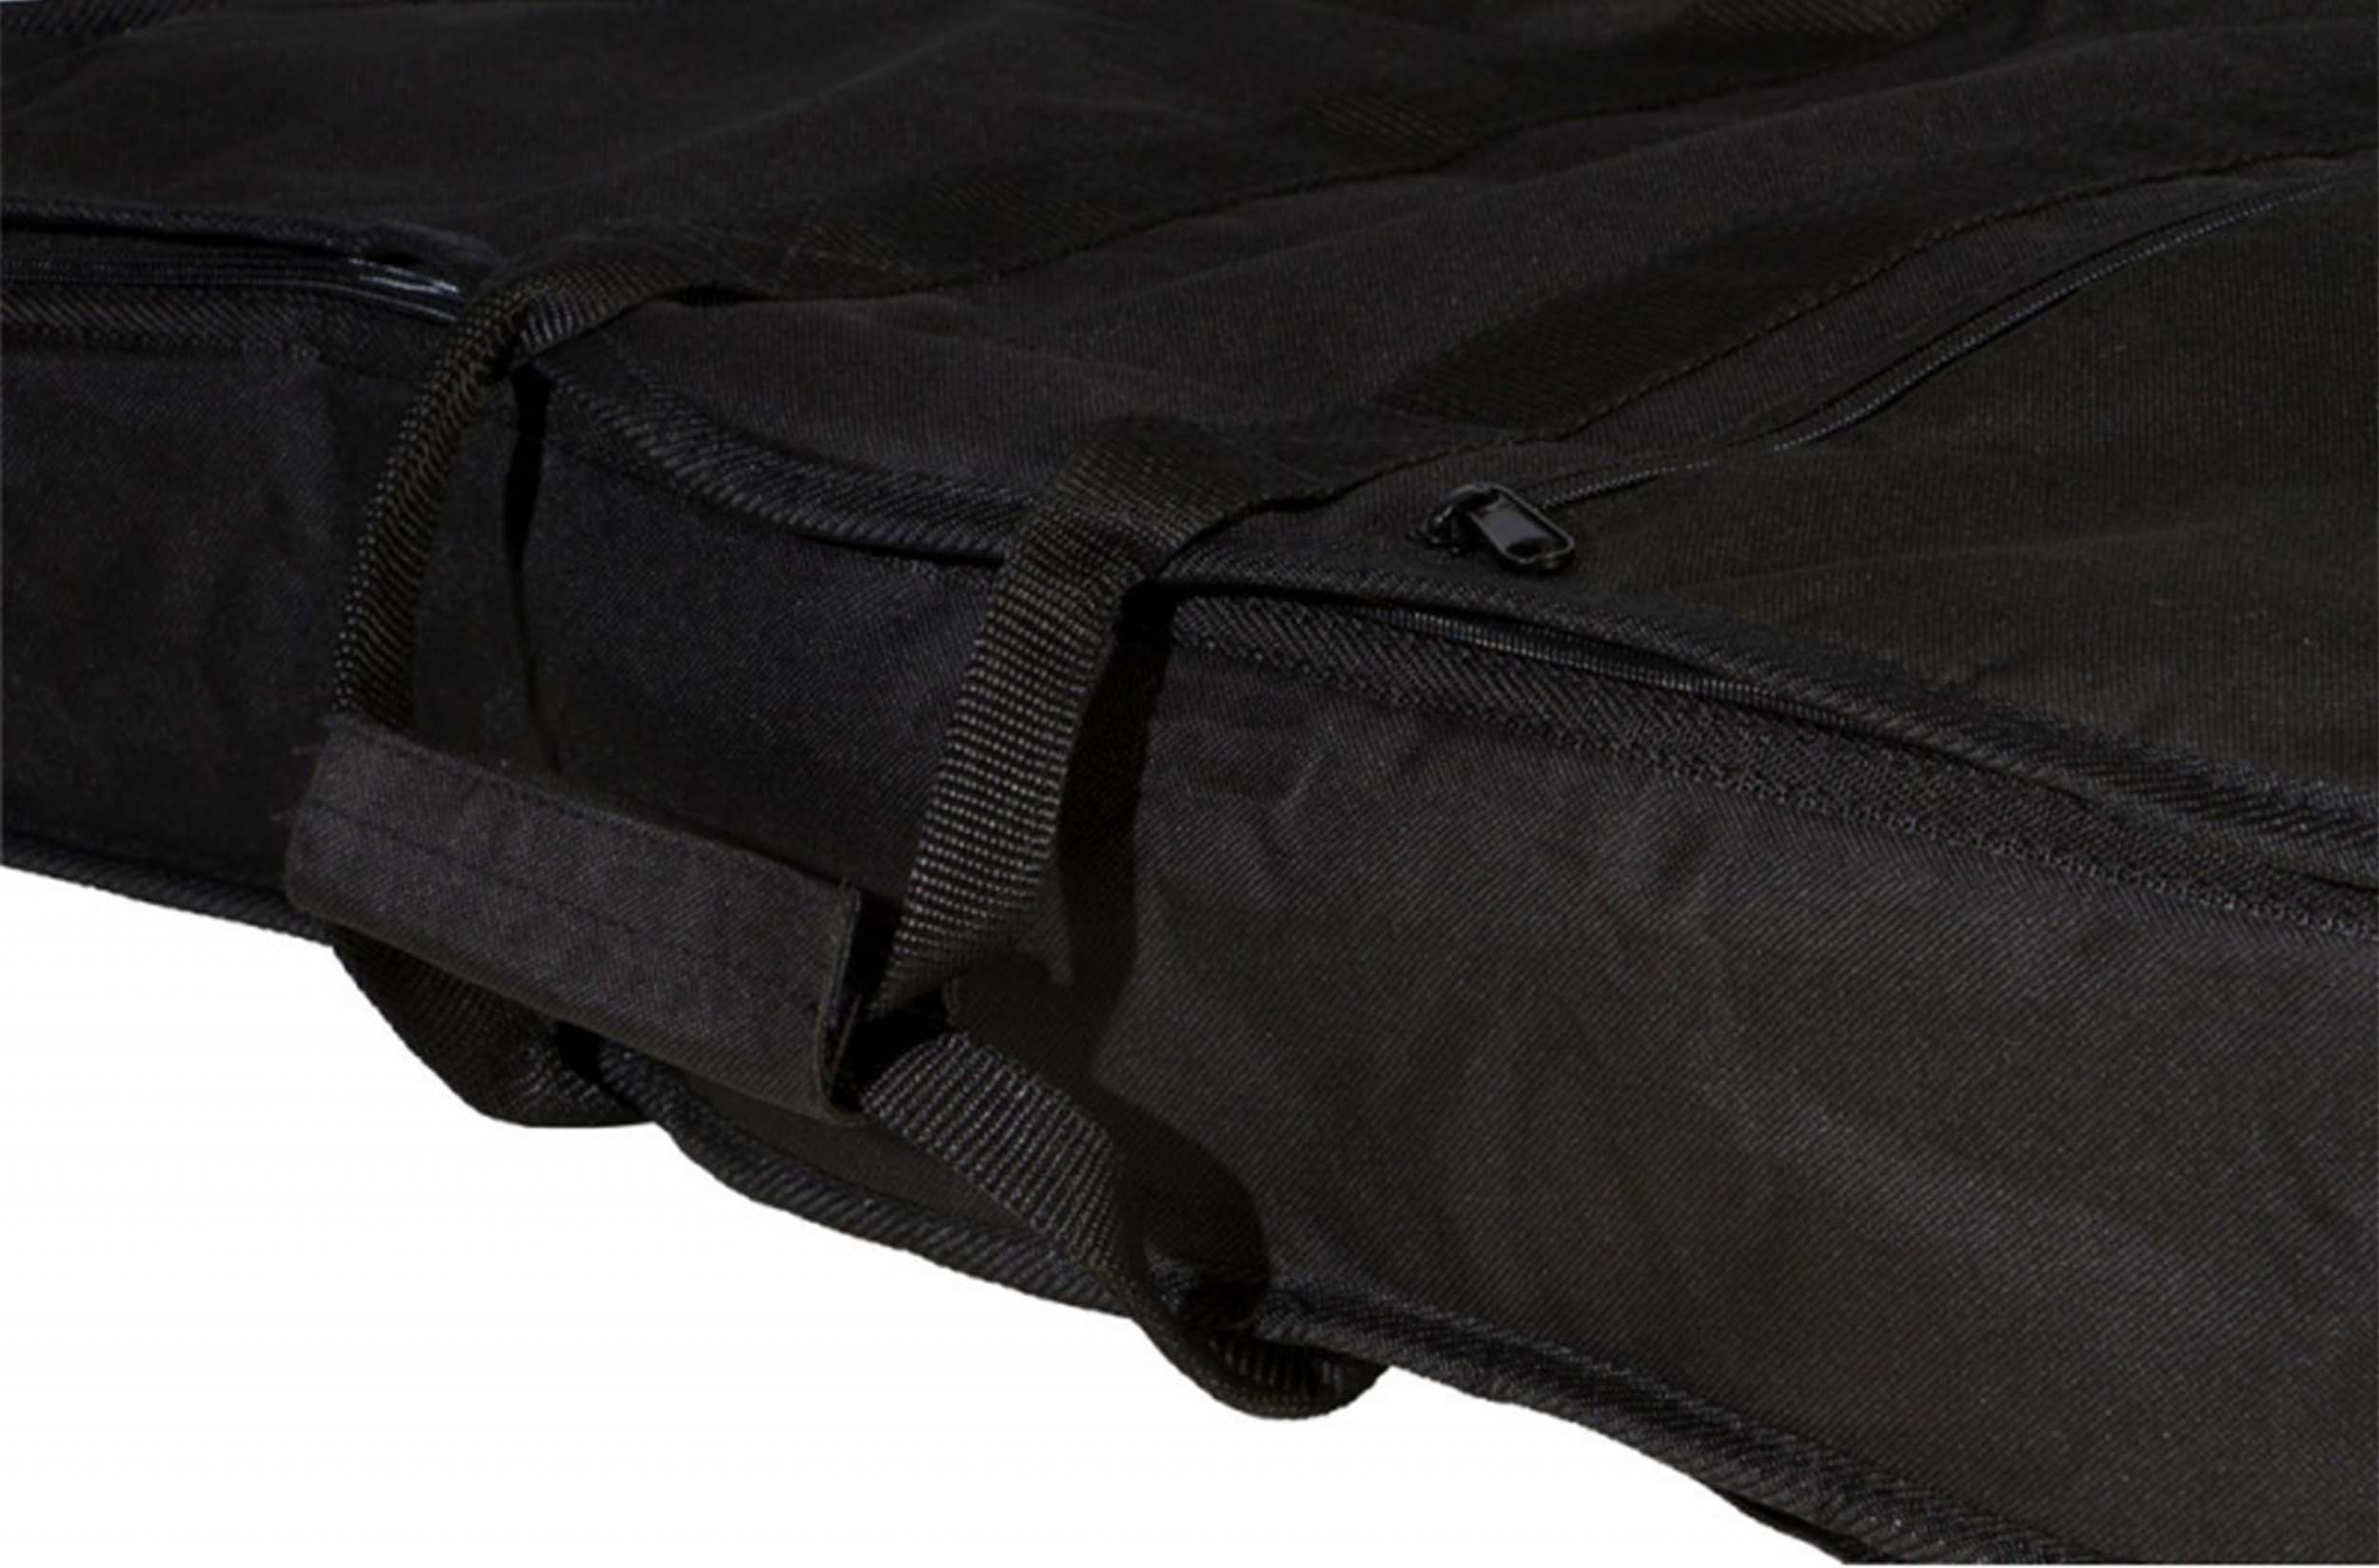 On Stage GBA4550, Acoustic Guitar Gig Bag - Black On-Stage